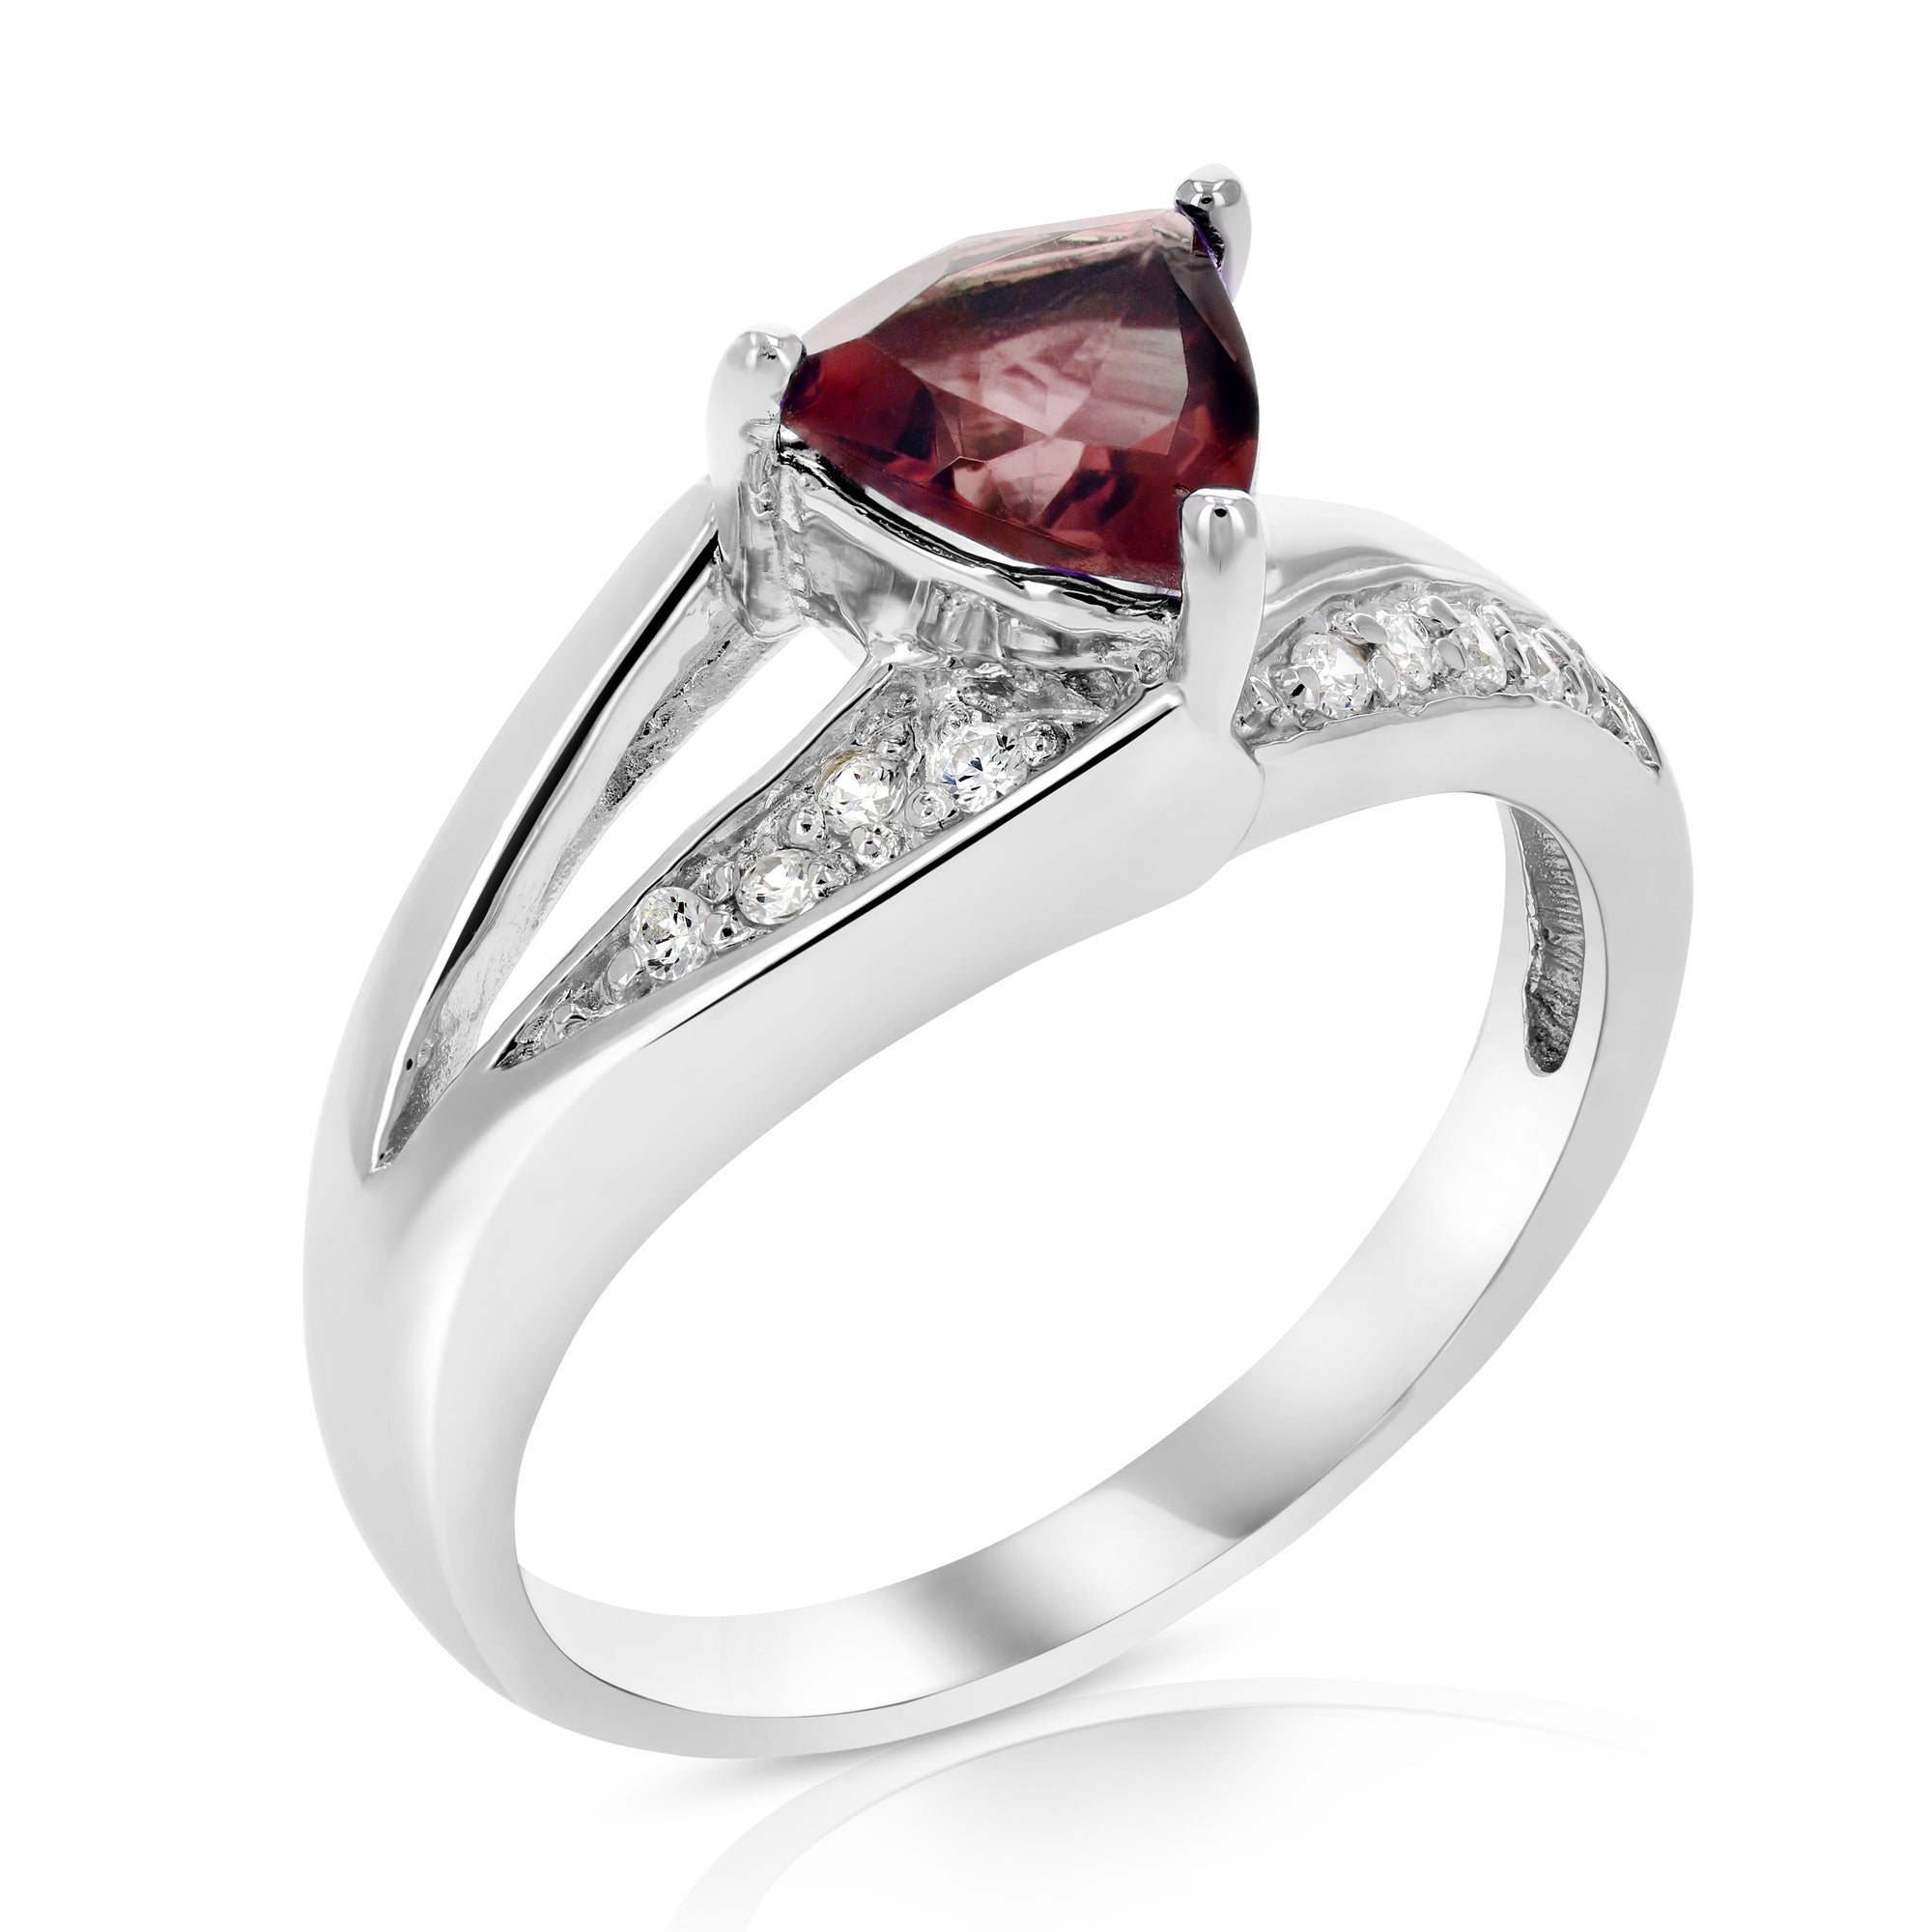 0.80 cttw Garnet Ring .925 Sterling Silver with Rhodium Triangle Shape 7 MM